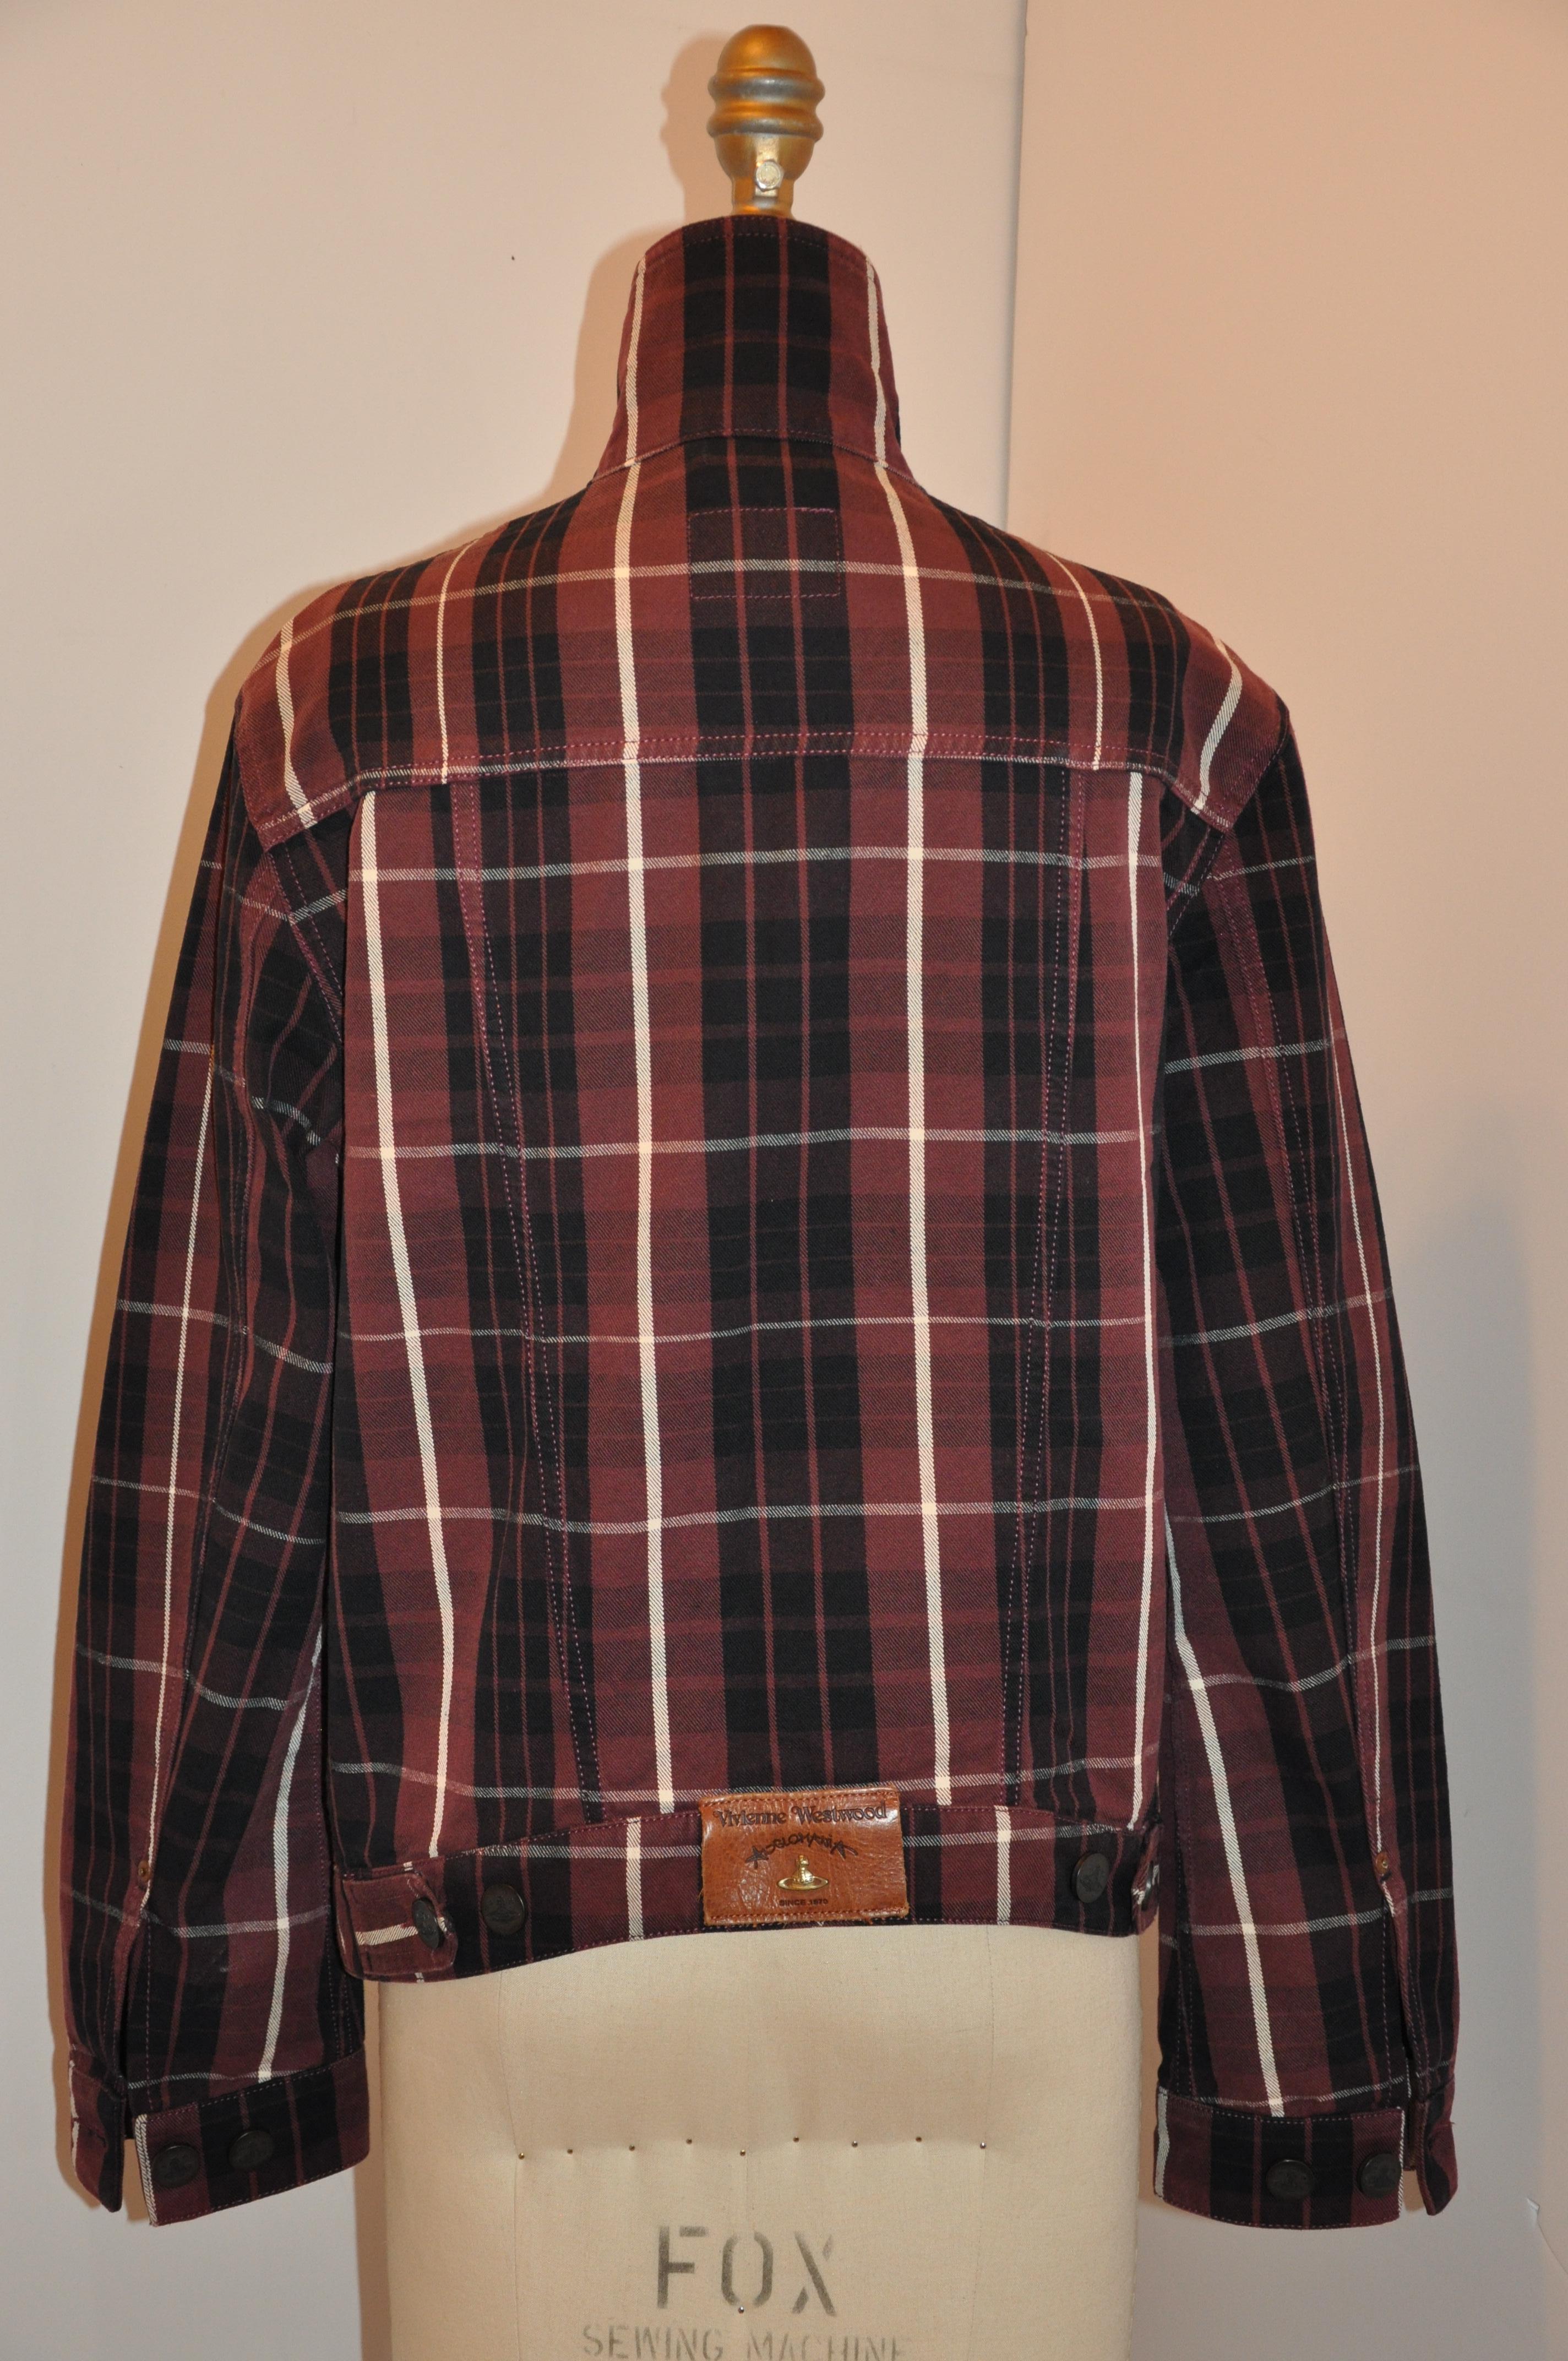 Rare Vivienne Westwood Coco-Brown, Black & Cream Cotton Plaid Button Jacket In Good Condition For Sale In New York, NY